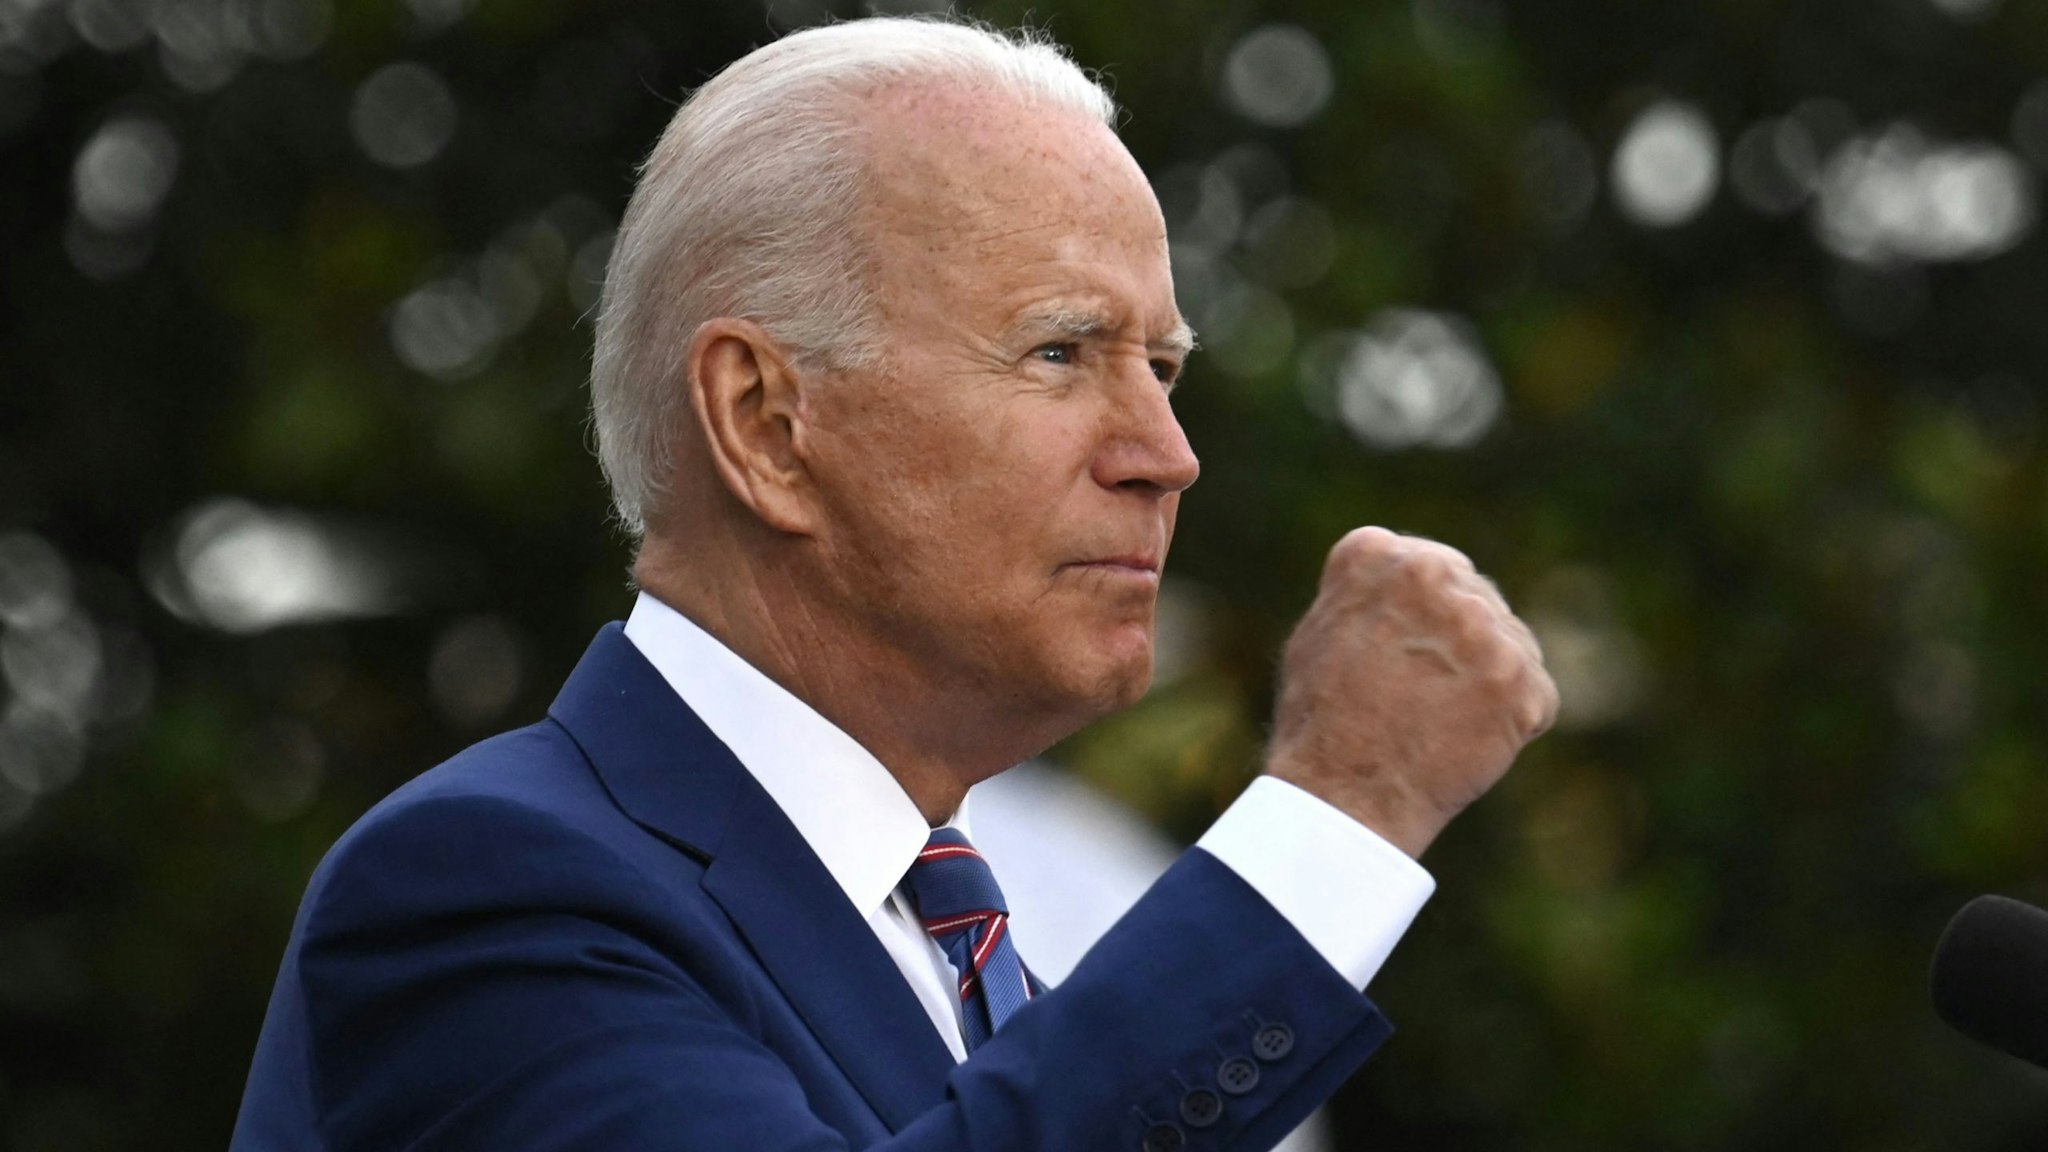 US President Joe Biden gestures as he speaks during Independence Day celebrations on the South Lawn of the White House in Washington, DC, July 4, 2021.